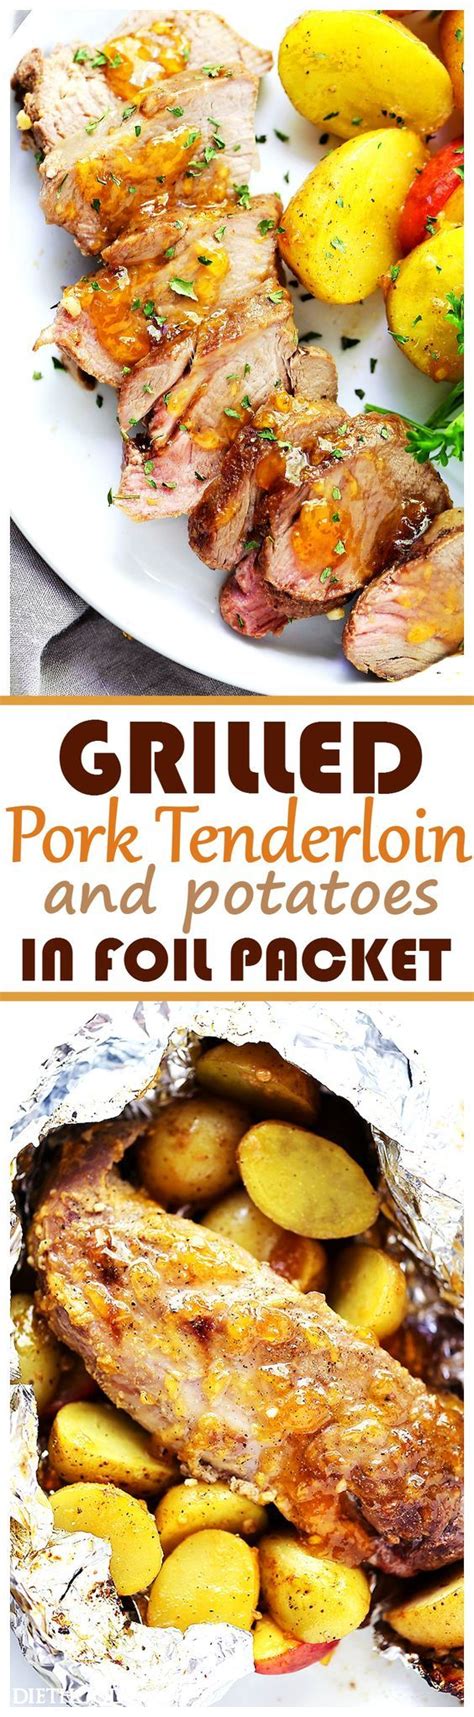 Or until tenderloin is done (145ºf). Easy Tin Foil Packets Suppers Recipes - Baked or Grilled Healthier Meals | Foil packet meals ...